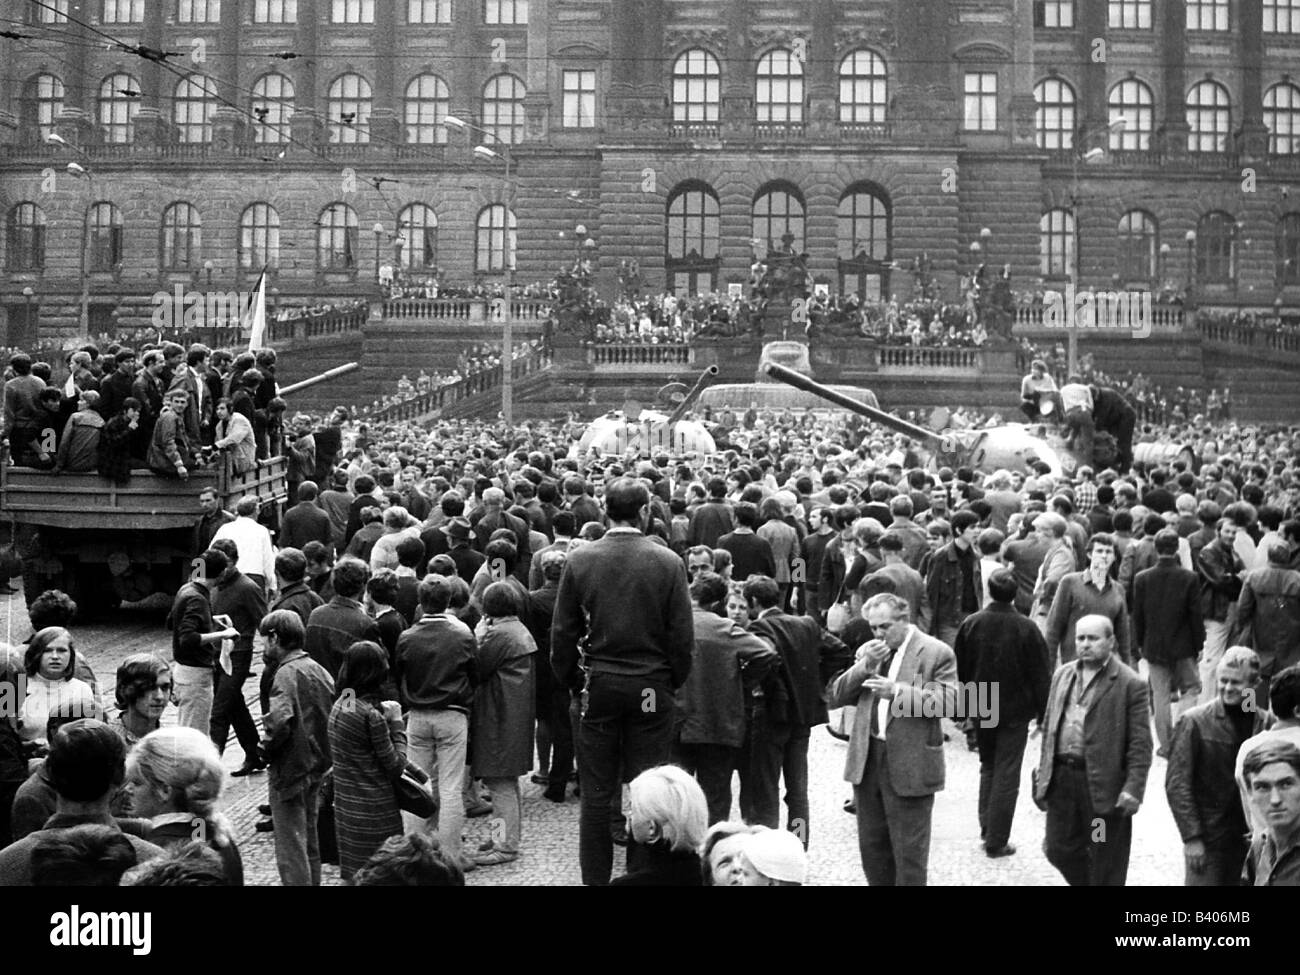 geography/travel, Czechia, Prague Spring, 1968, demonstration in Prague, demnstratrors with Soviet tanks, Wenceslaus Square, August 1968, CSSR, Czechoslovakia, politics, 20th century, historic, historical, people, crowd, crowds, 1960s, Stock Photo